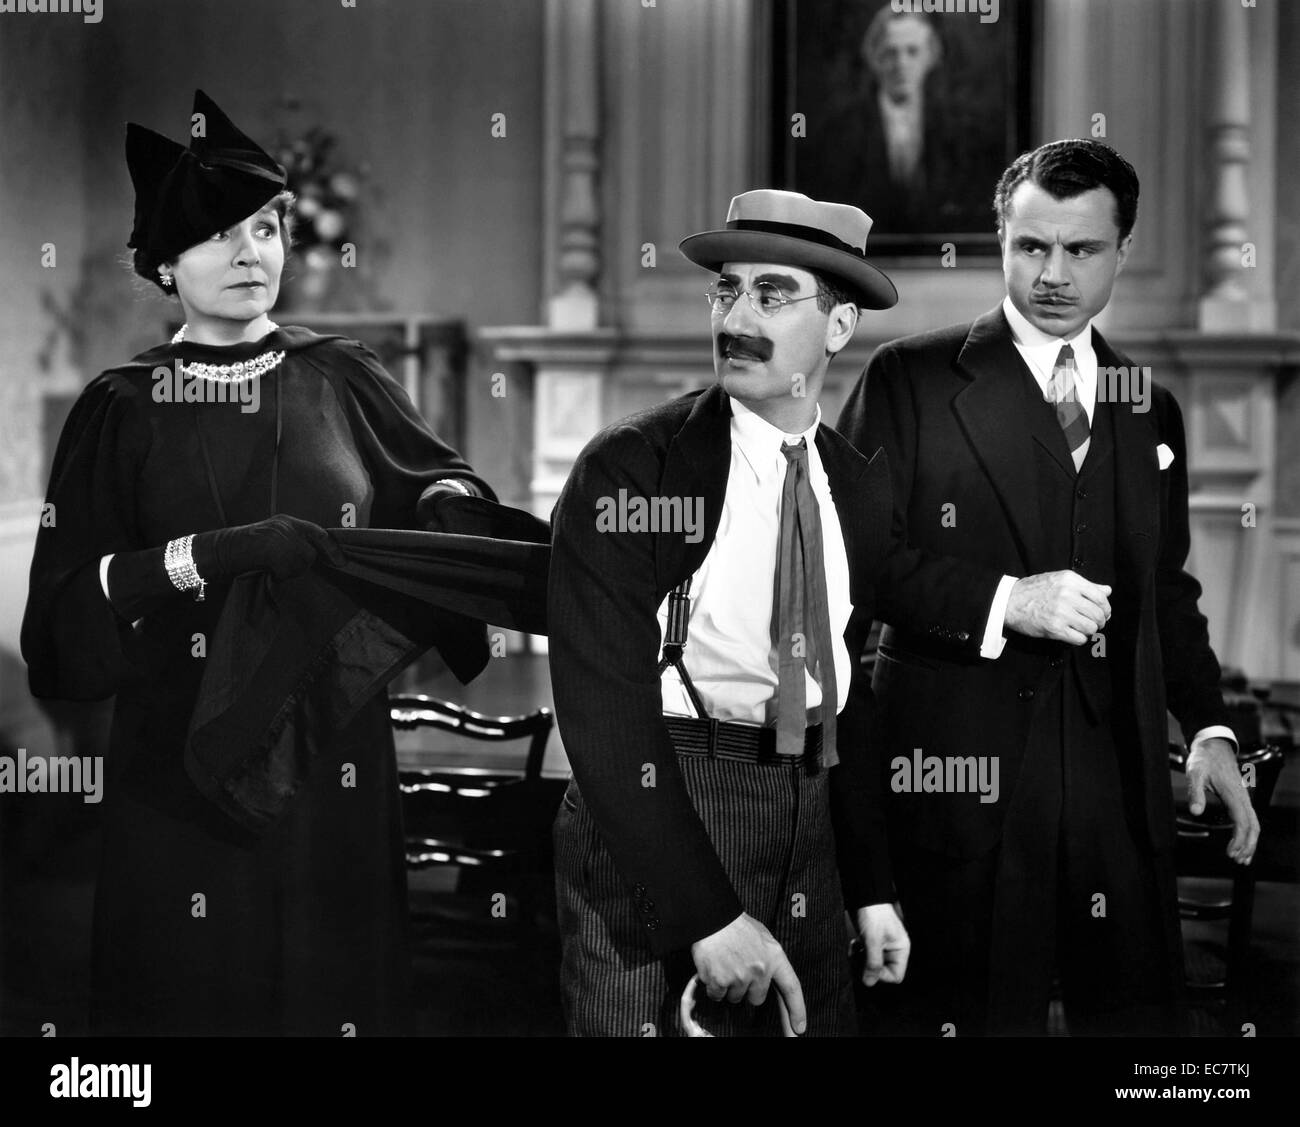 A Day at the Races (1937) is the seventh film starring the three Marx Brothers, with Margaret Dumont, Allan Jones, and Maureen O'Sullivan. Like their previous MGM feature A Night at the Opera, this film was a major hit Stock Photo